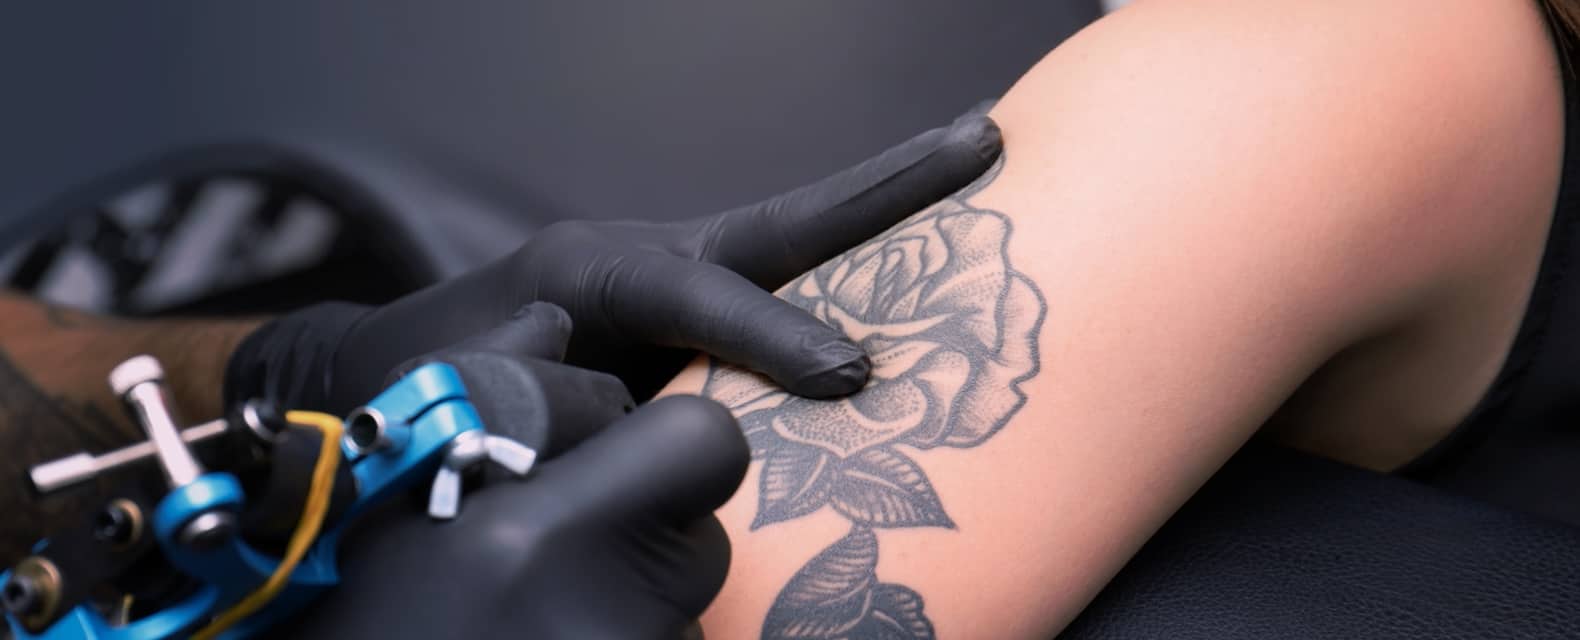 Image of a person getting a tattoo